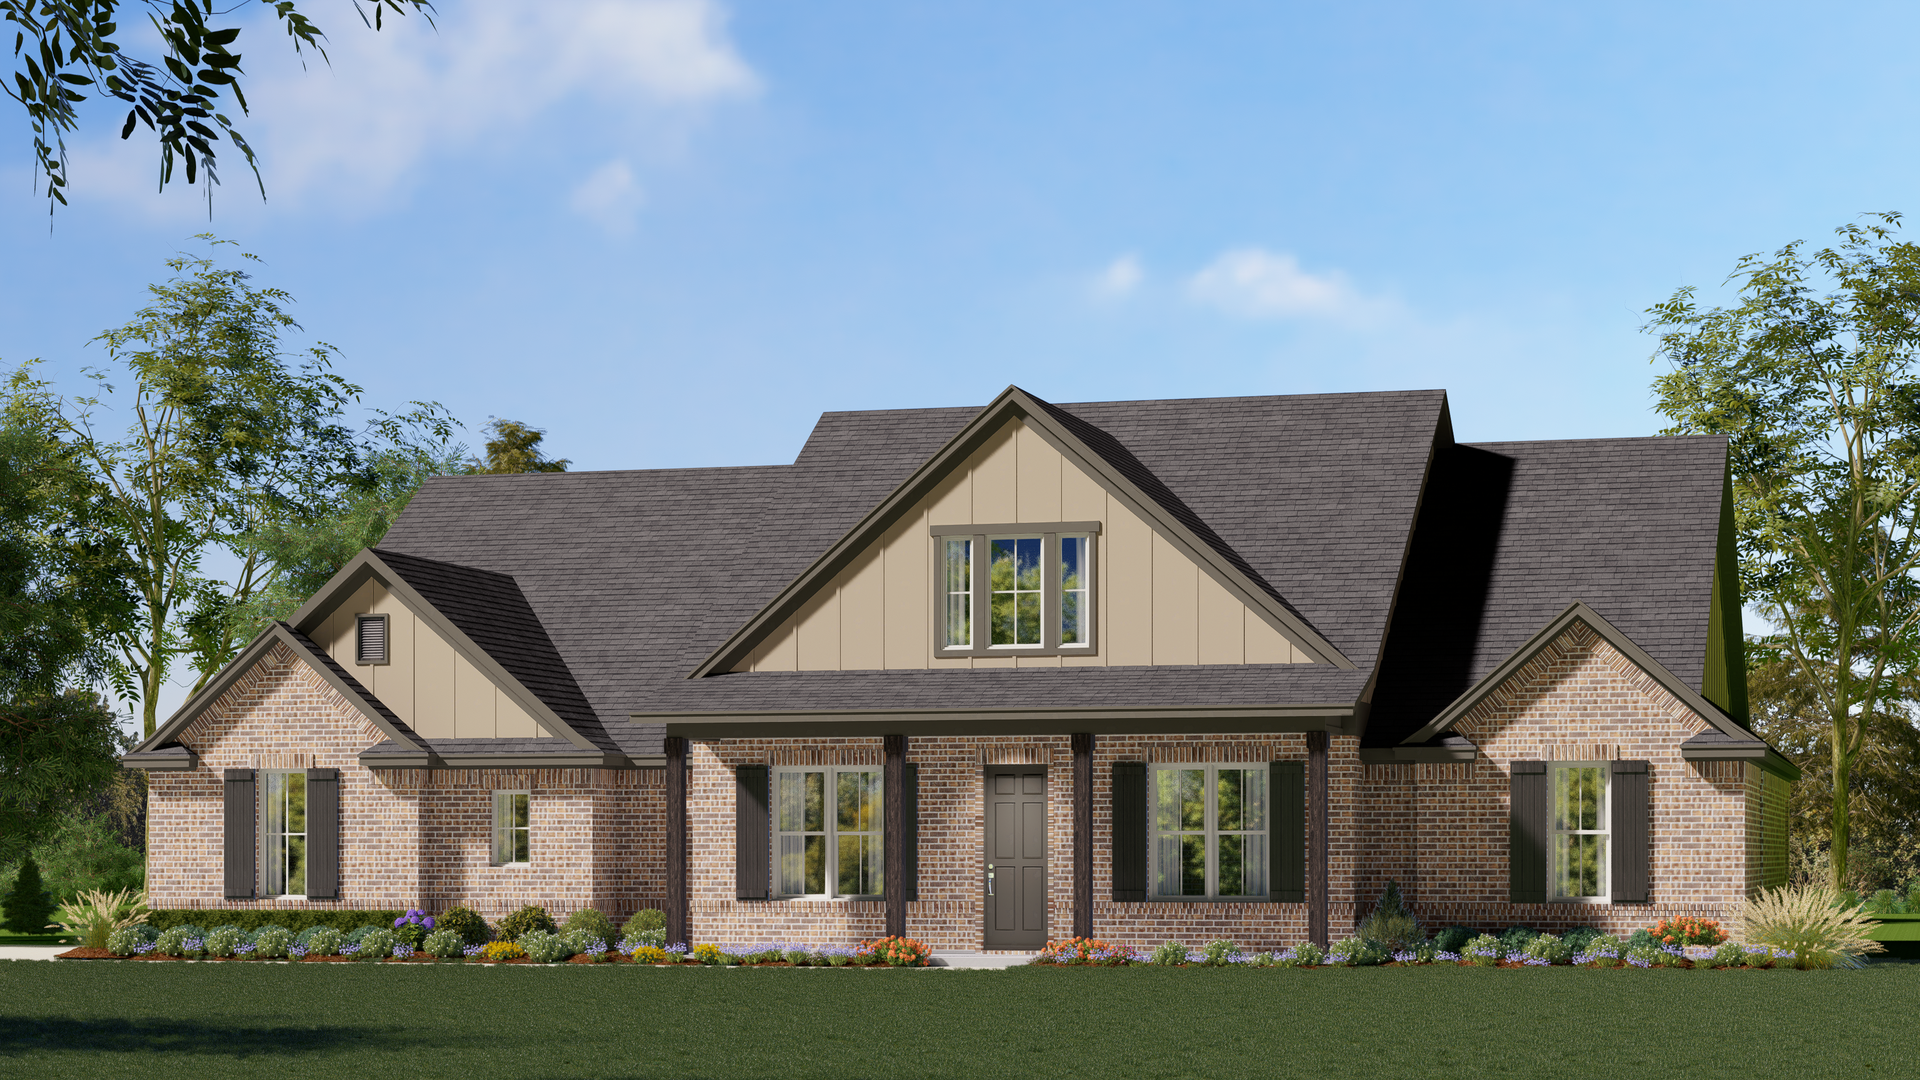 2586 C. 2,586sf New Home